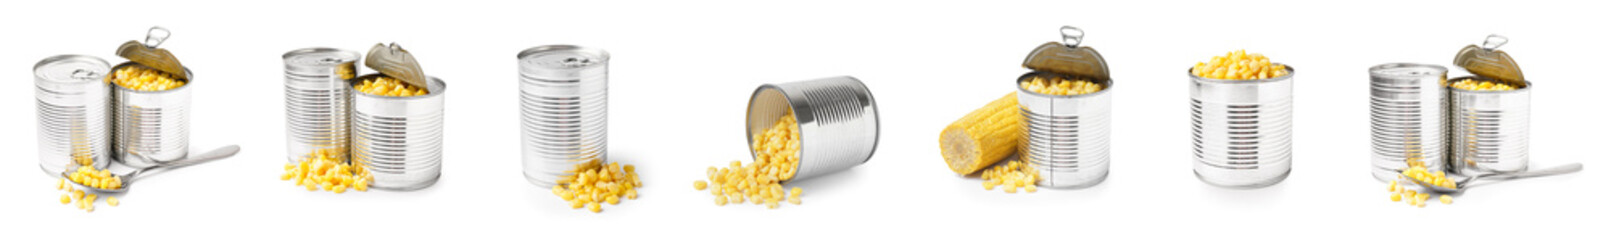 Set of canned corn on white background